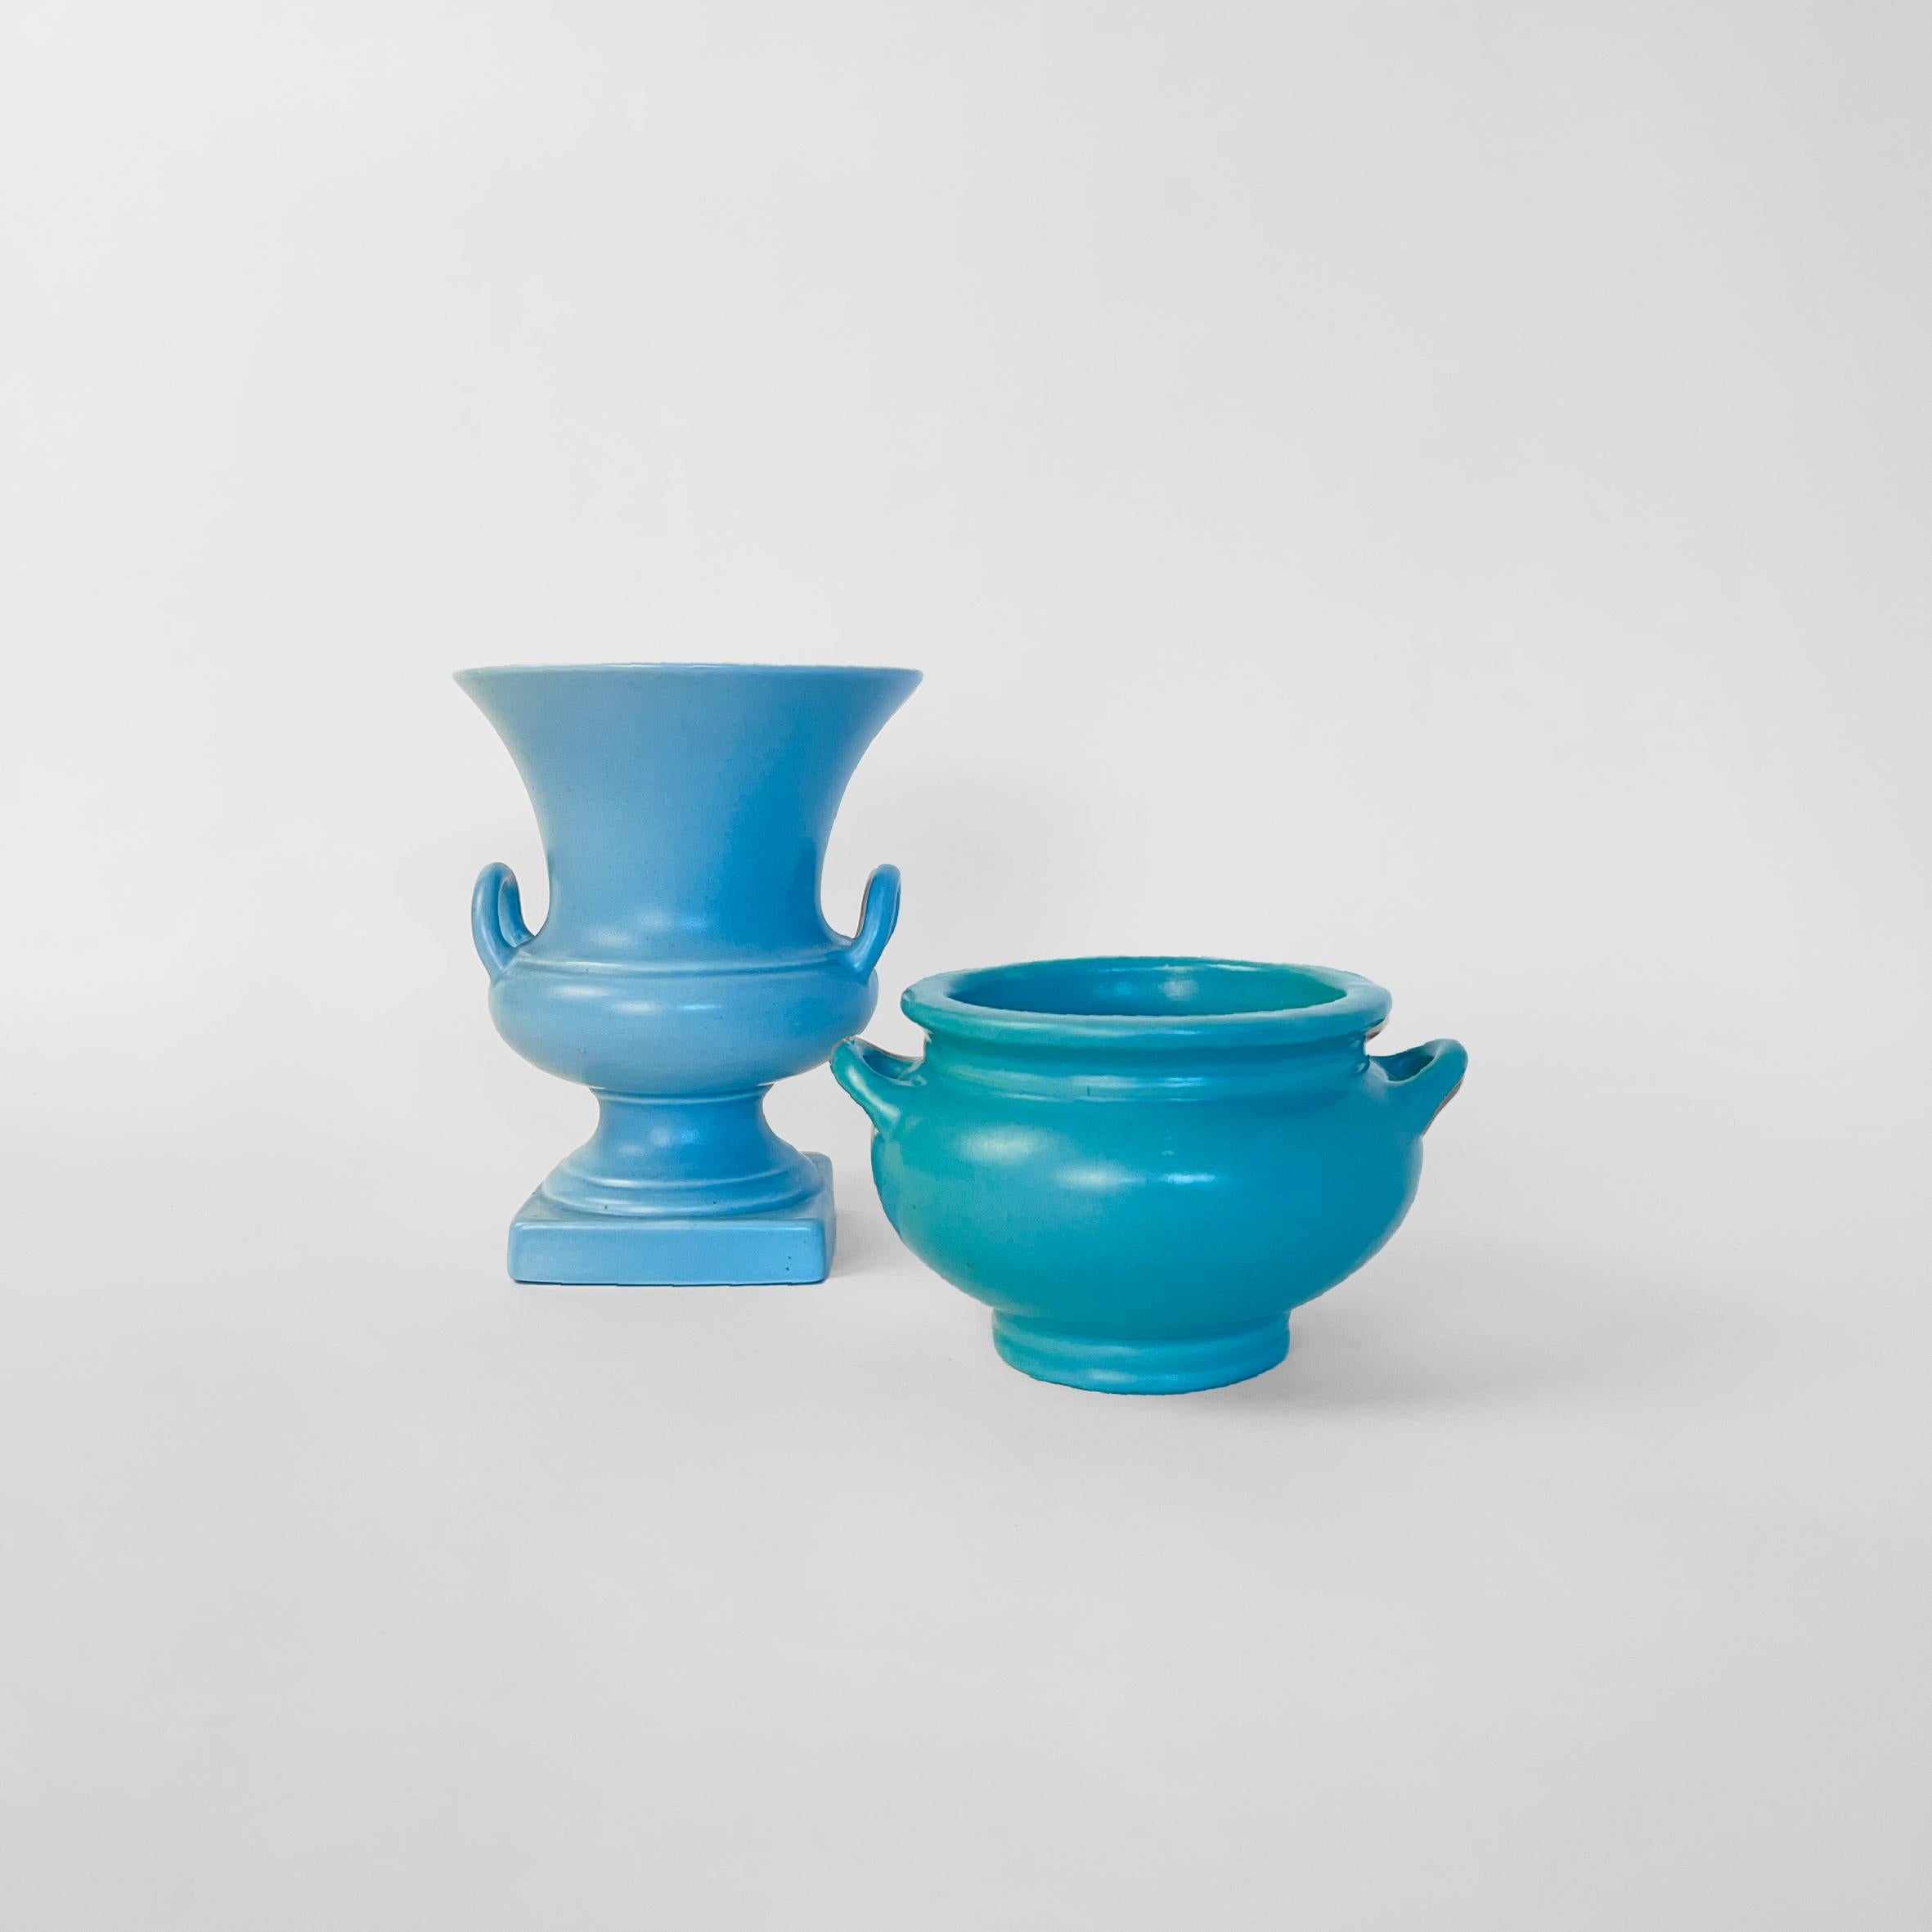 Set of two American Ceramic urn and low bowl in different shades of Adam's blue.
Urn stamped Red Wing USA 87 i.
Both made in United States, circa 1950.
DIMENSIONS
URN
Height 7 IN / 17.78 CM
Diam 5.75 IN / 14.60 CM
LOW BOWL
Height 3.5 IN / 8.89